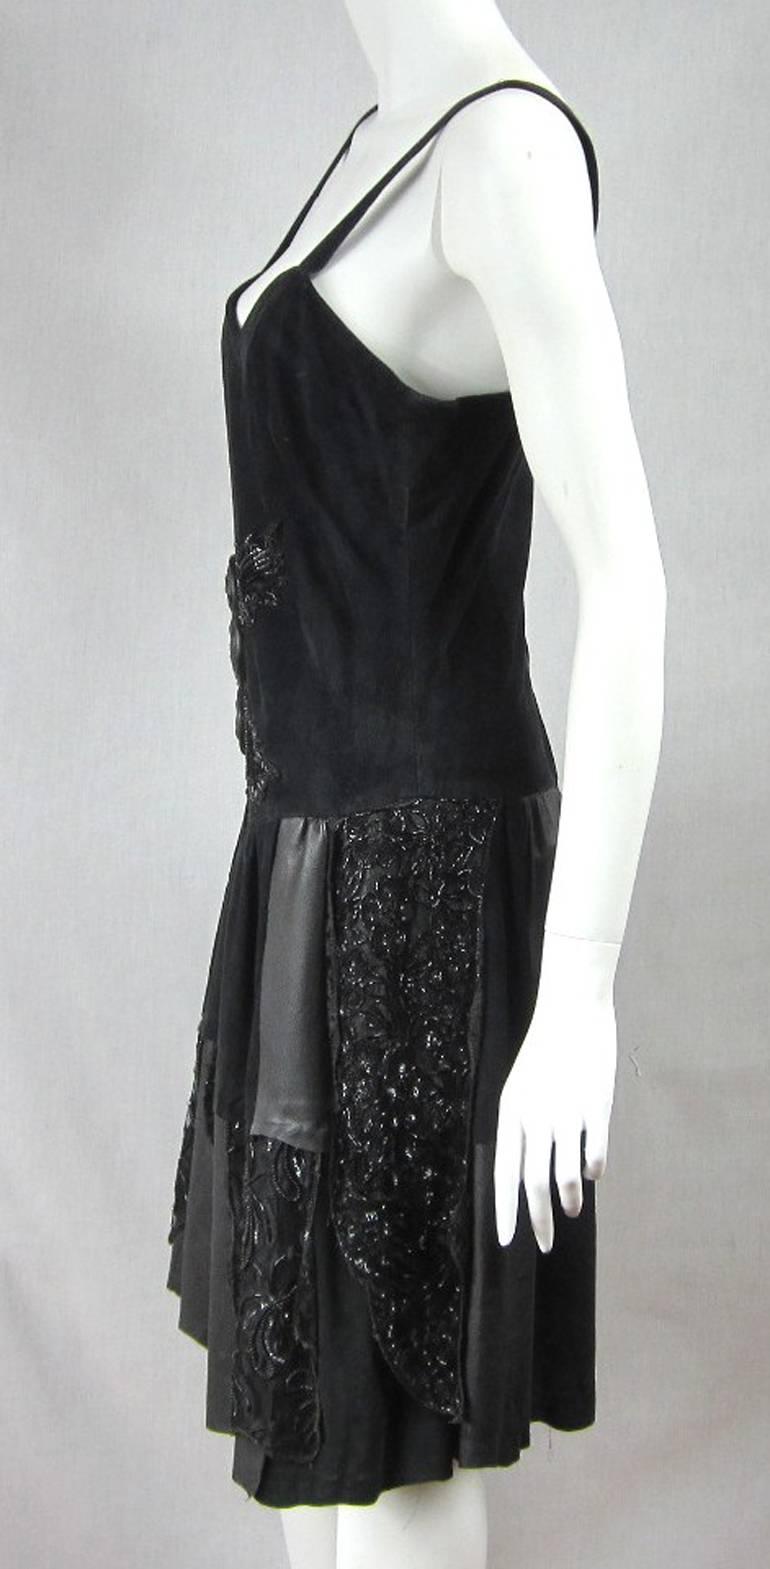  Leather Suede Sequin Black Dress 1980s  For Sale 1